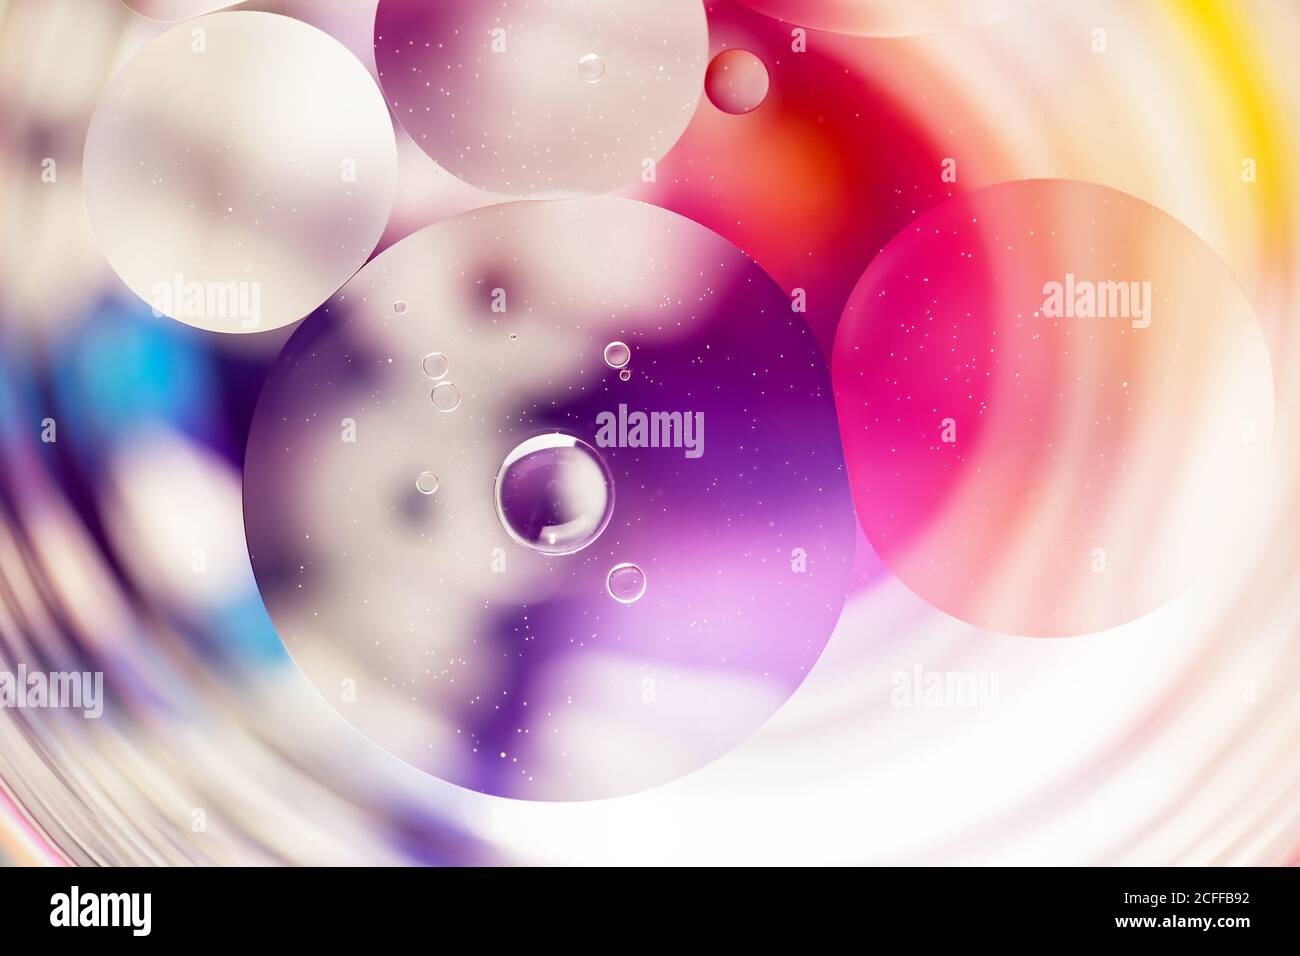 Water bubbles abstract colorful  background Stock Photo